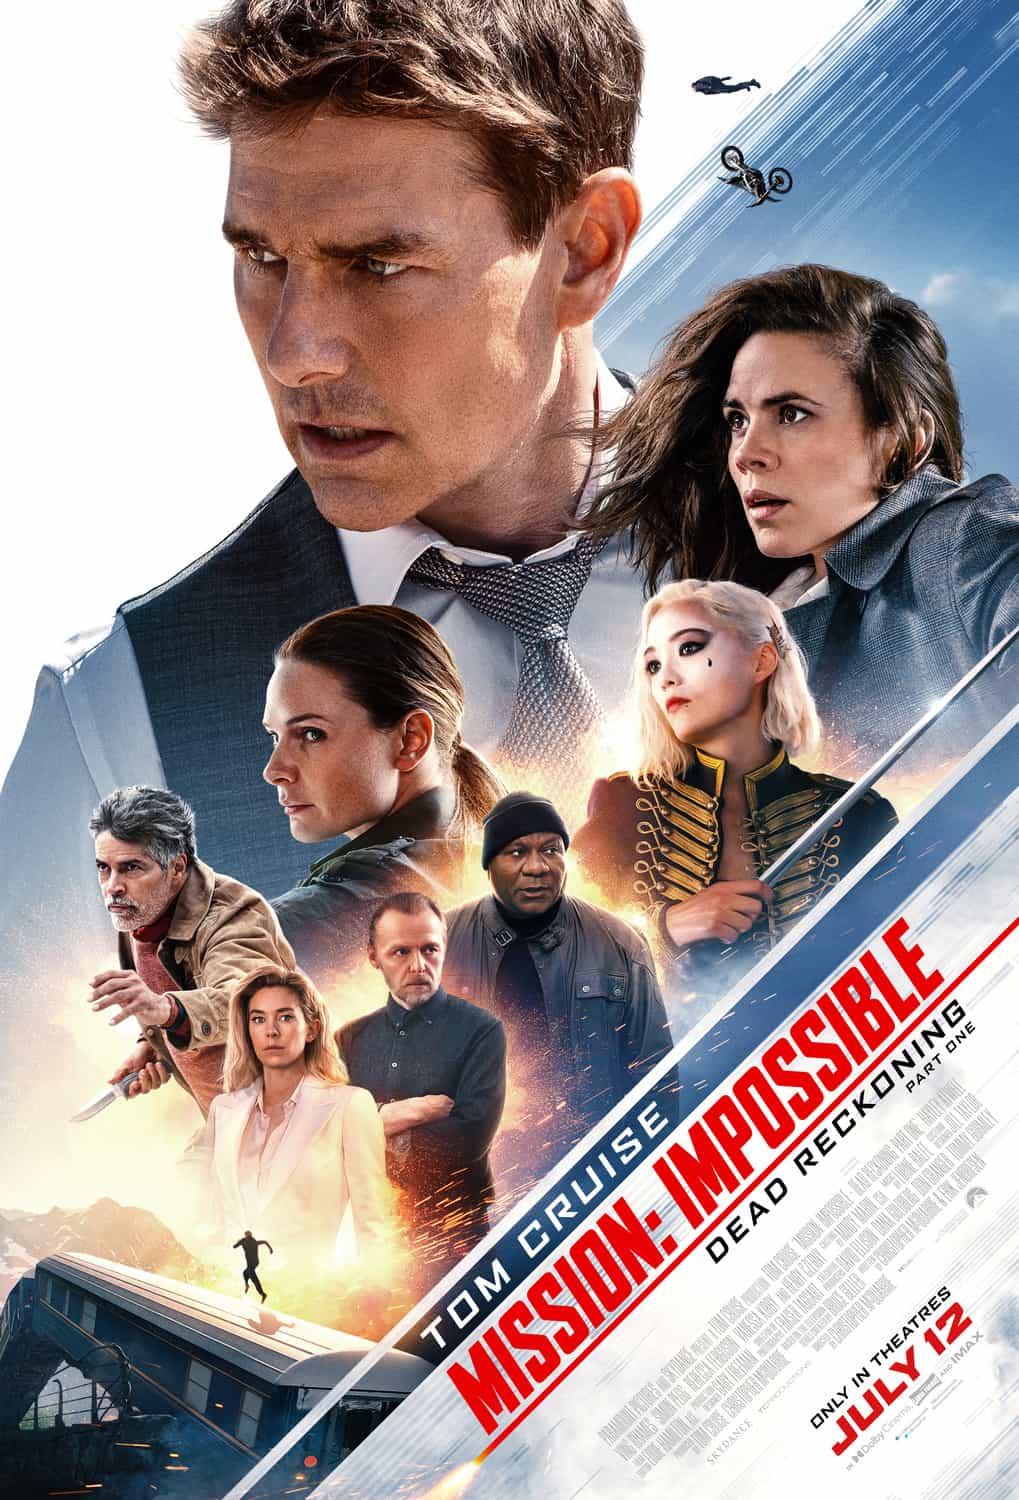 First trailer for Mission:Impossible - Dead Reckoning Part 1 starring Tom Cruise and his IMF agents